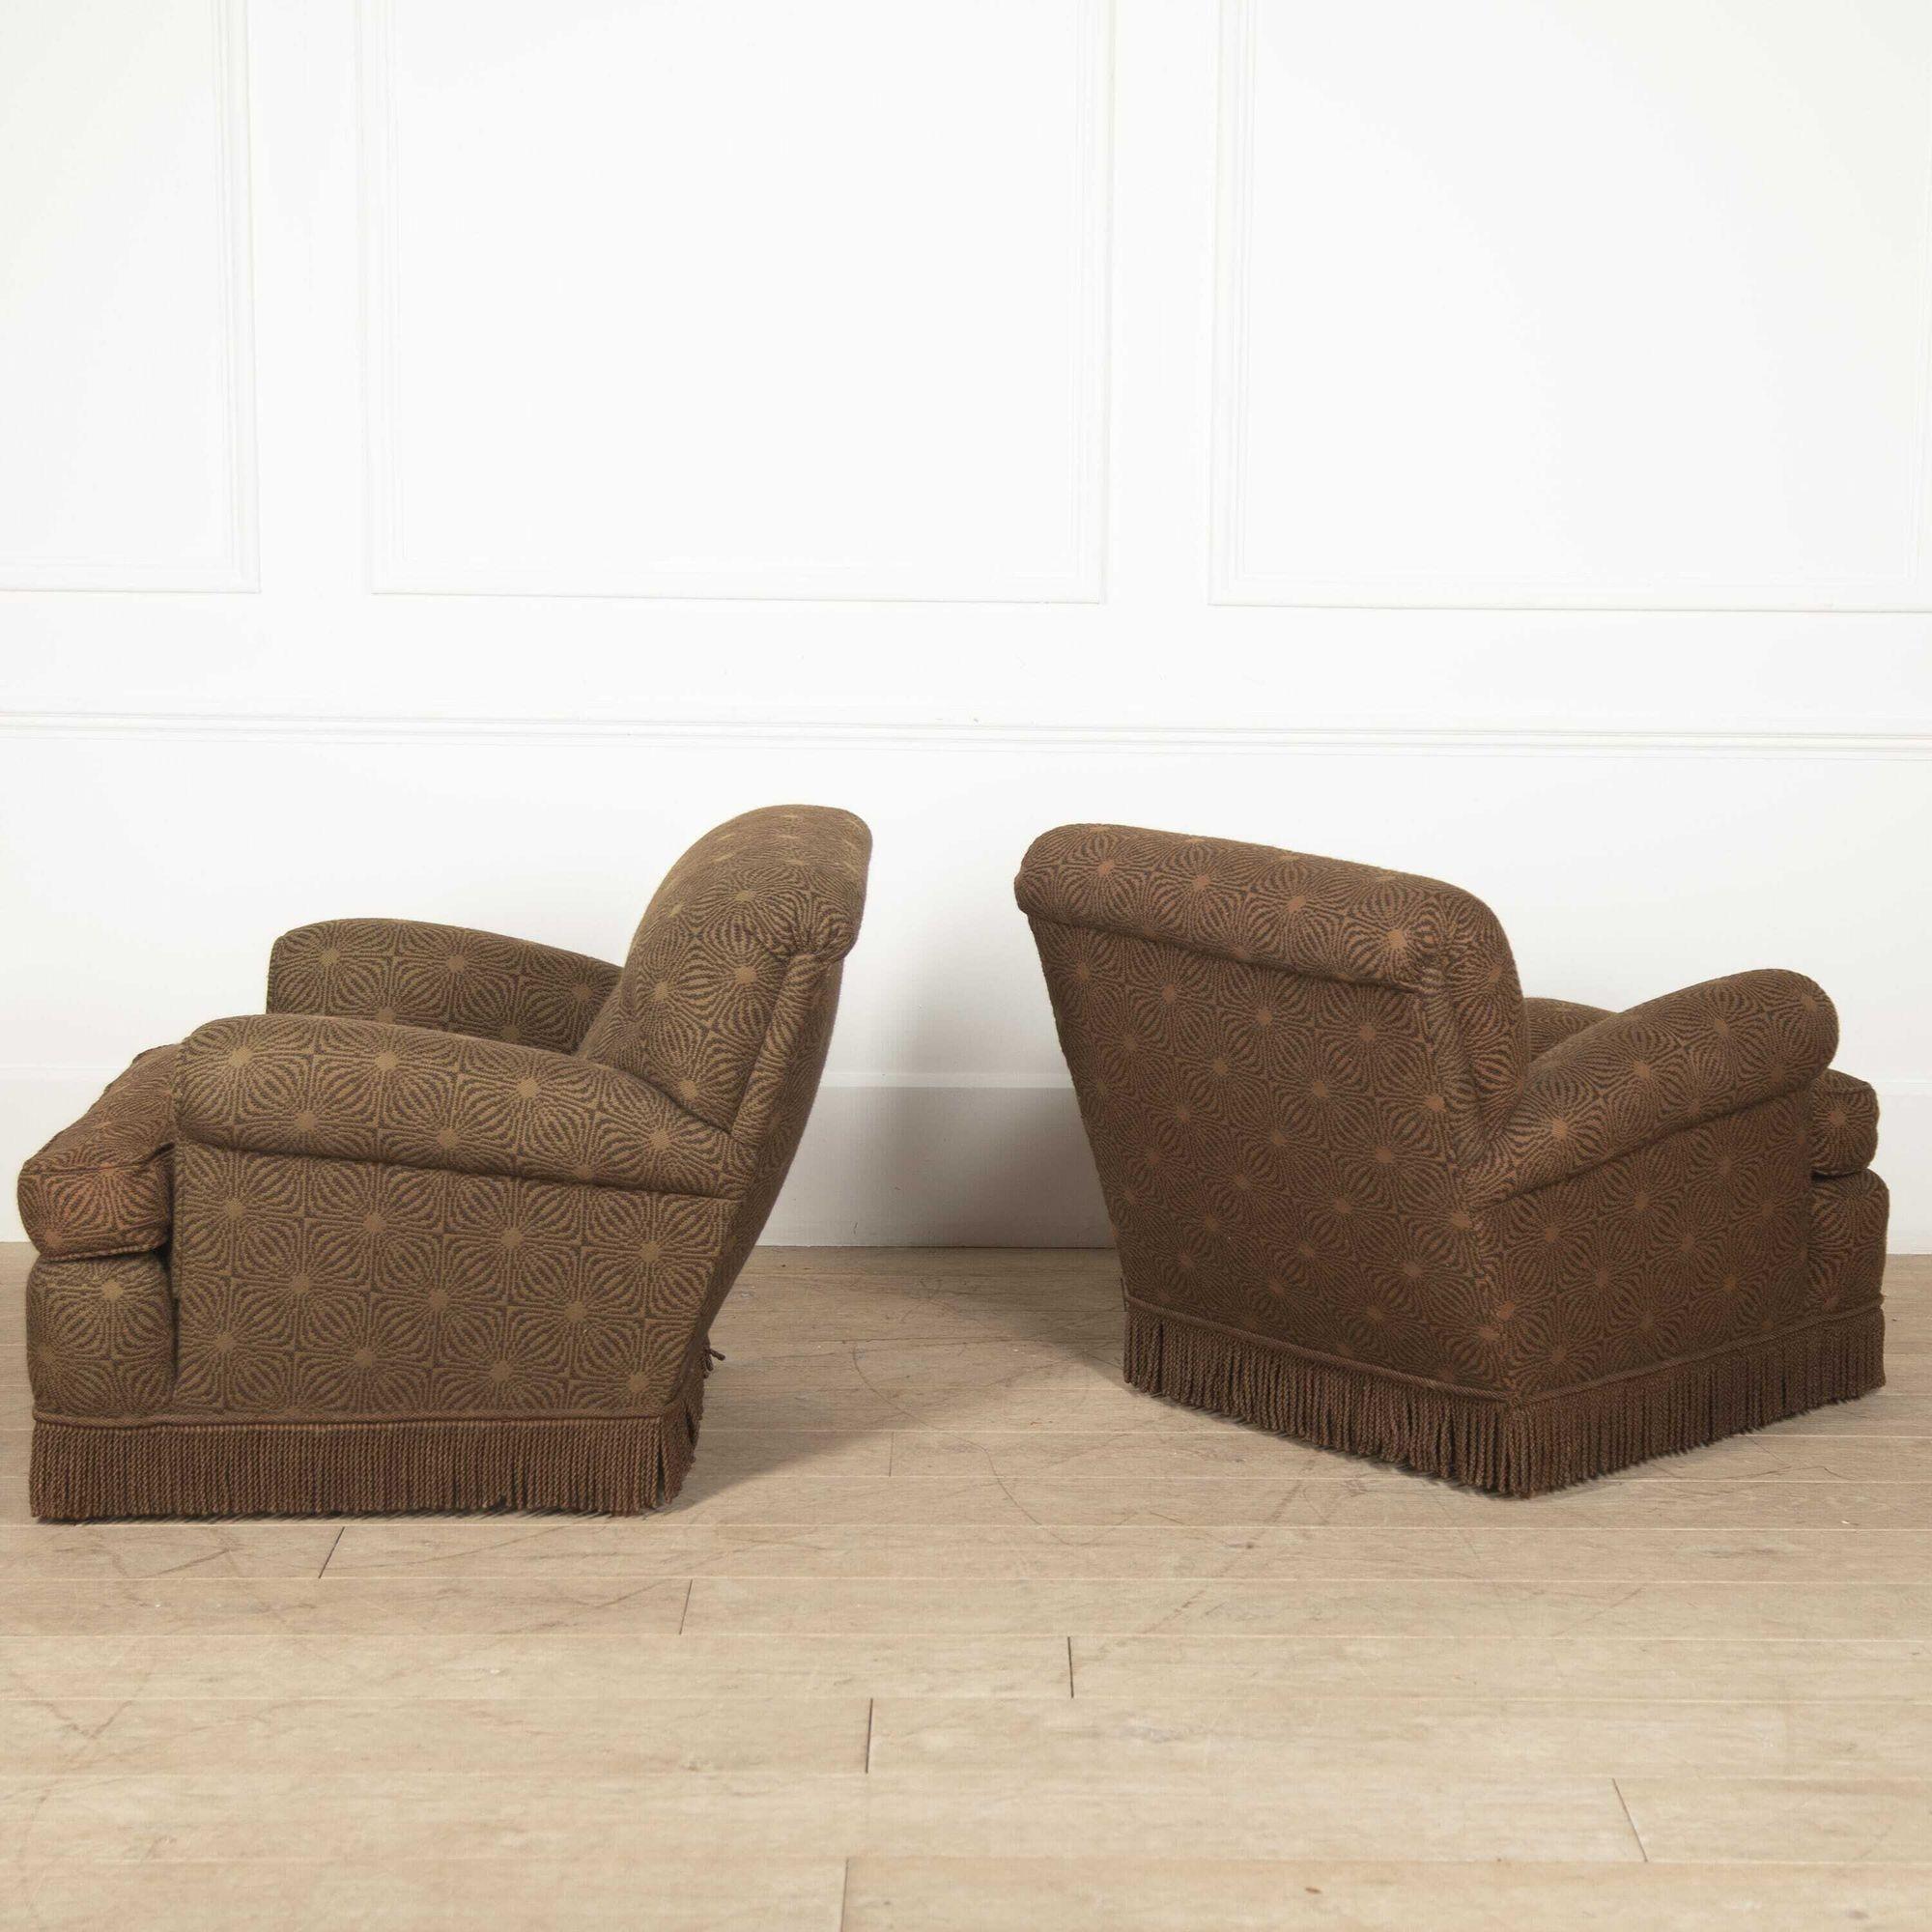 Superb pair of 20th century club armchairs by Maison Jansen. 
These stylish armchairs are attributed to the master of interior decor Maison Jansen. The Paris-based firm was founded in 1880 and quickly became the first global design firm, serving